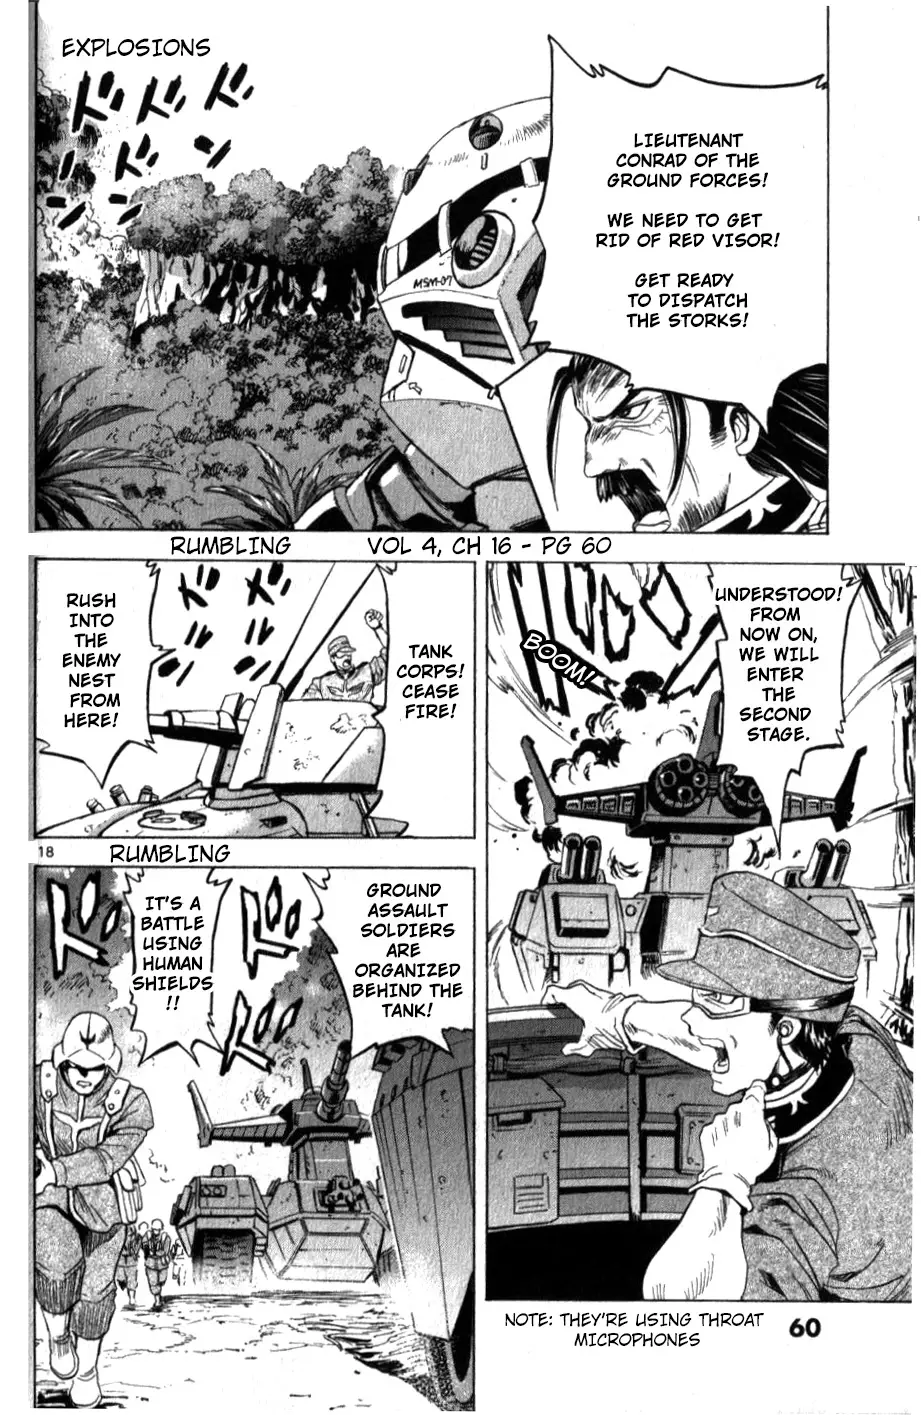 Mobile Suit Gundam Aggressor - 16 page 17-81dd80a9